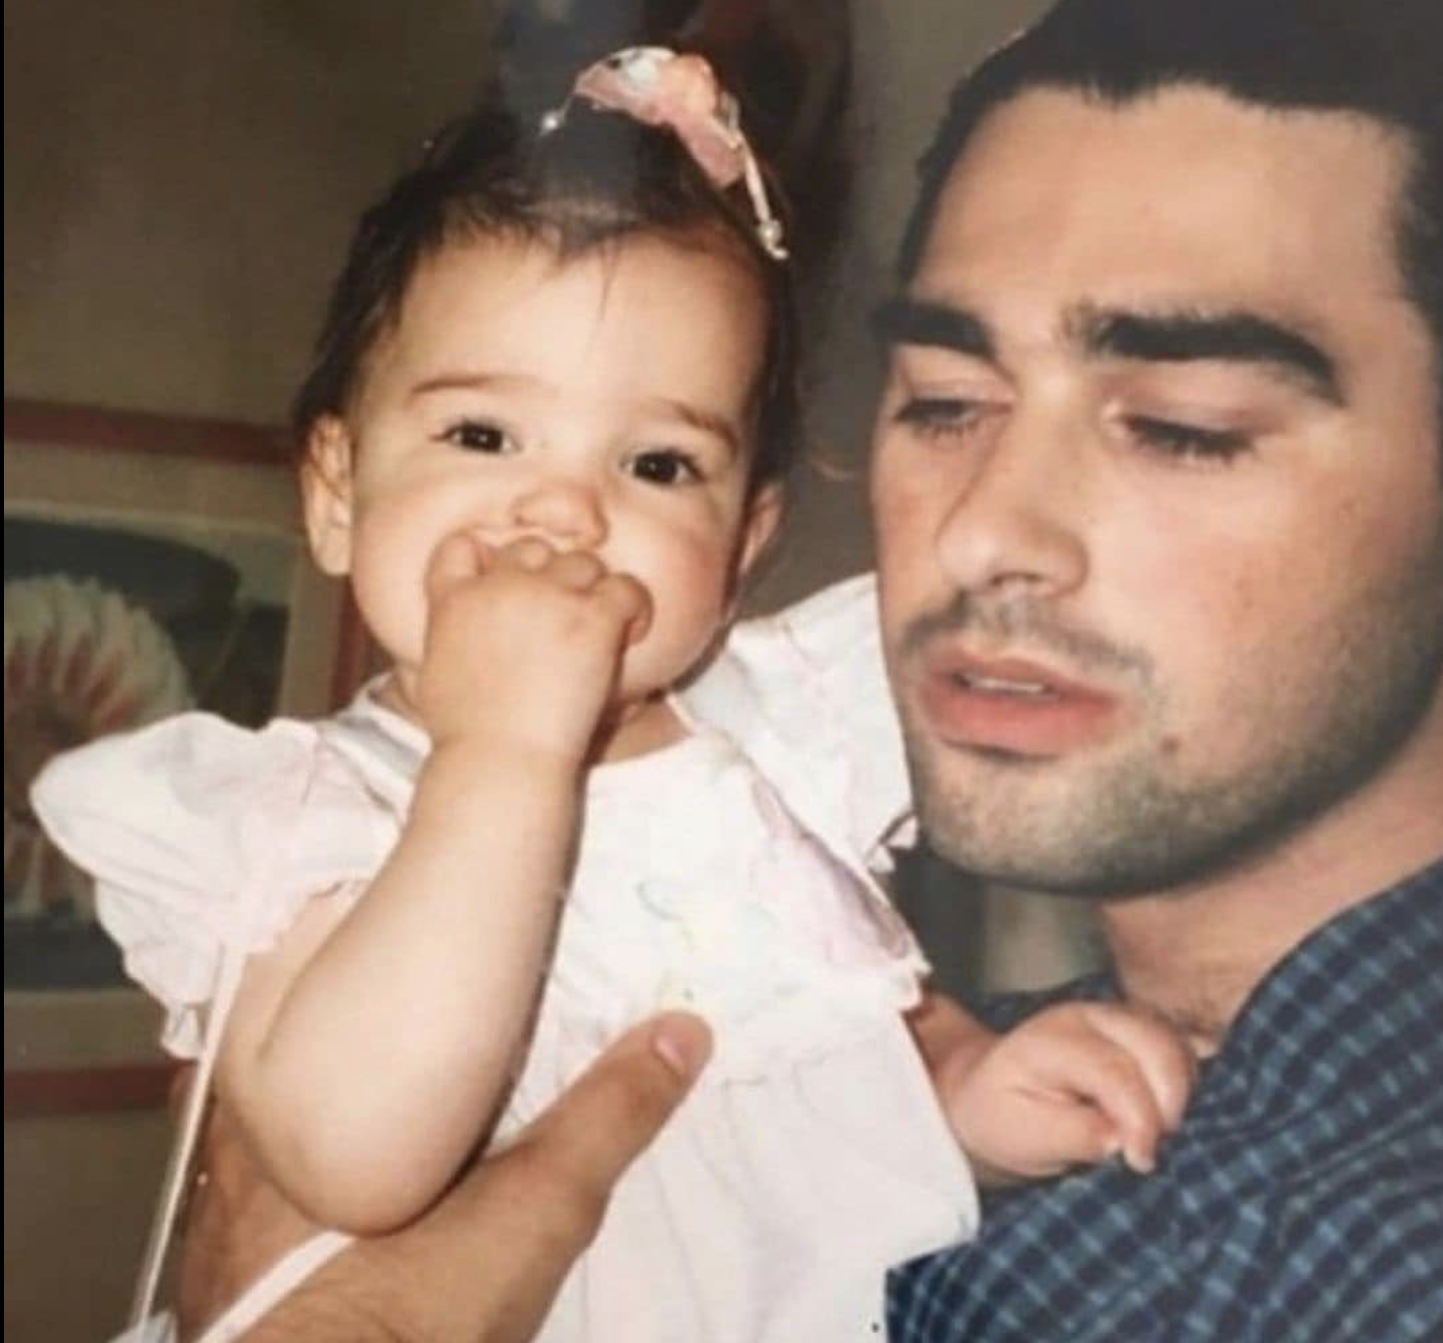 The girl and her father | Source: facebook.com/DuaLipa